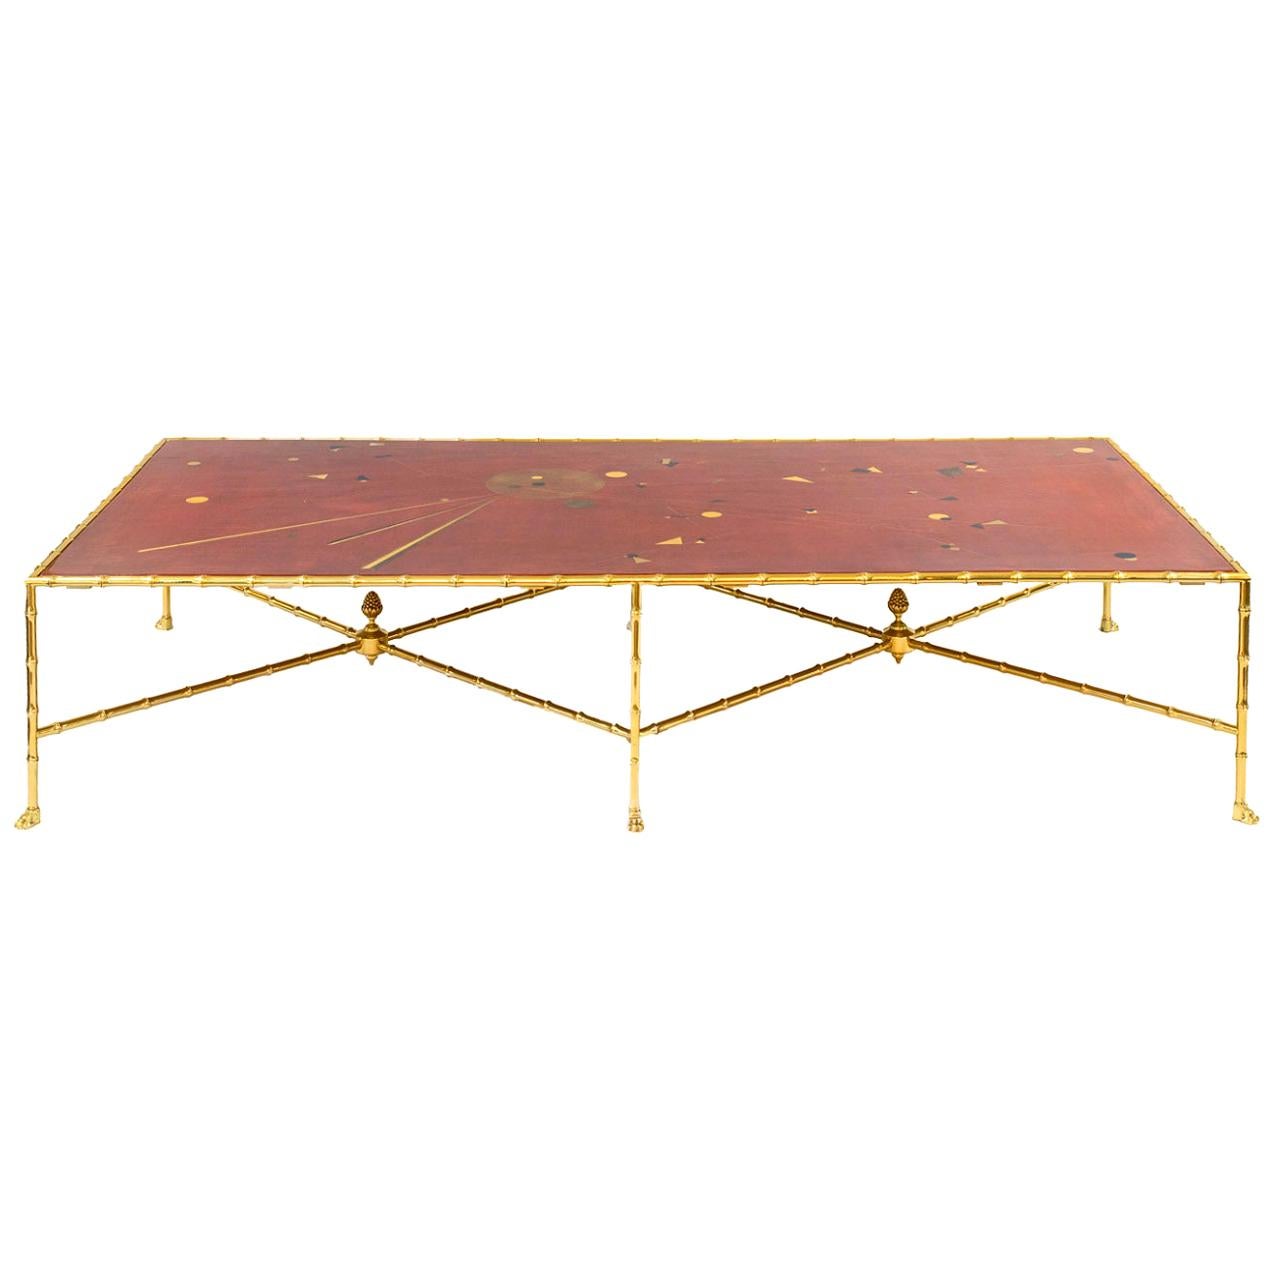 Large Coffee Table in Red Lacquer and Gilt Brass, Contemporary Work